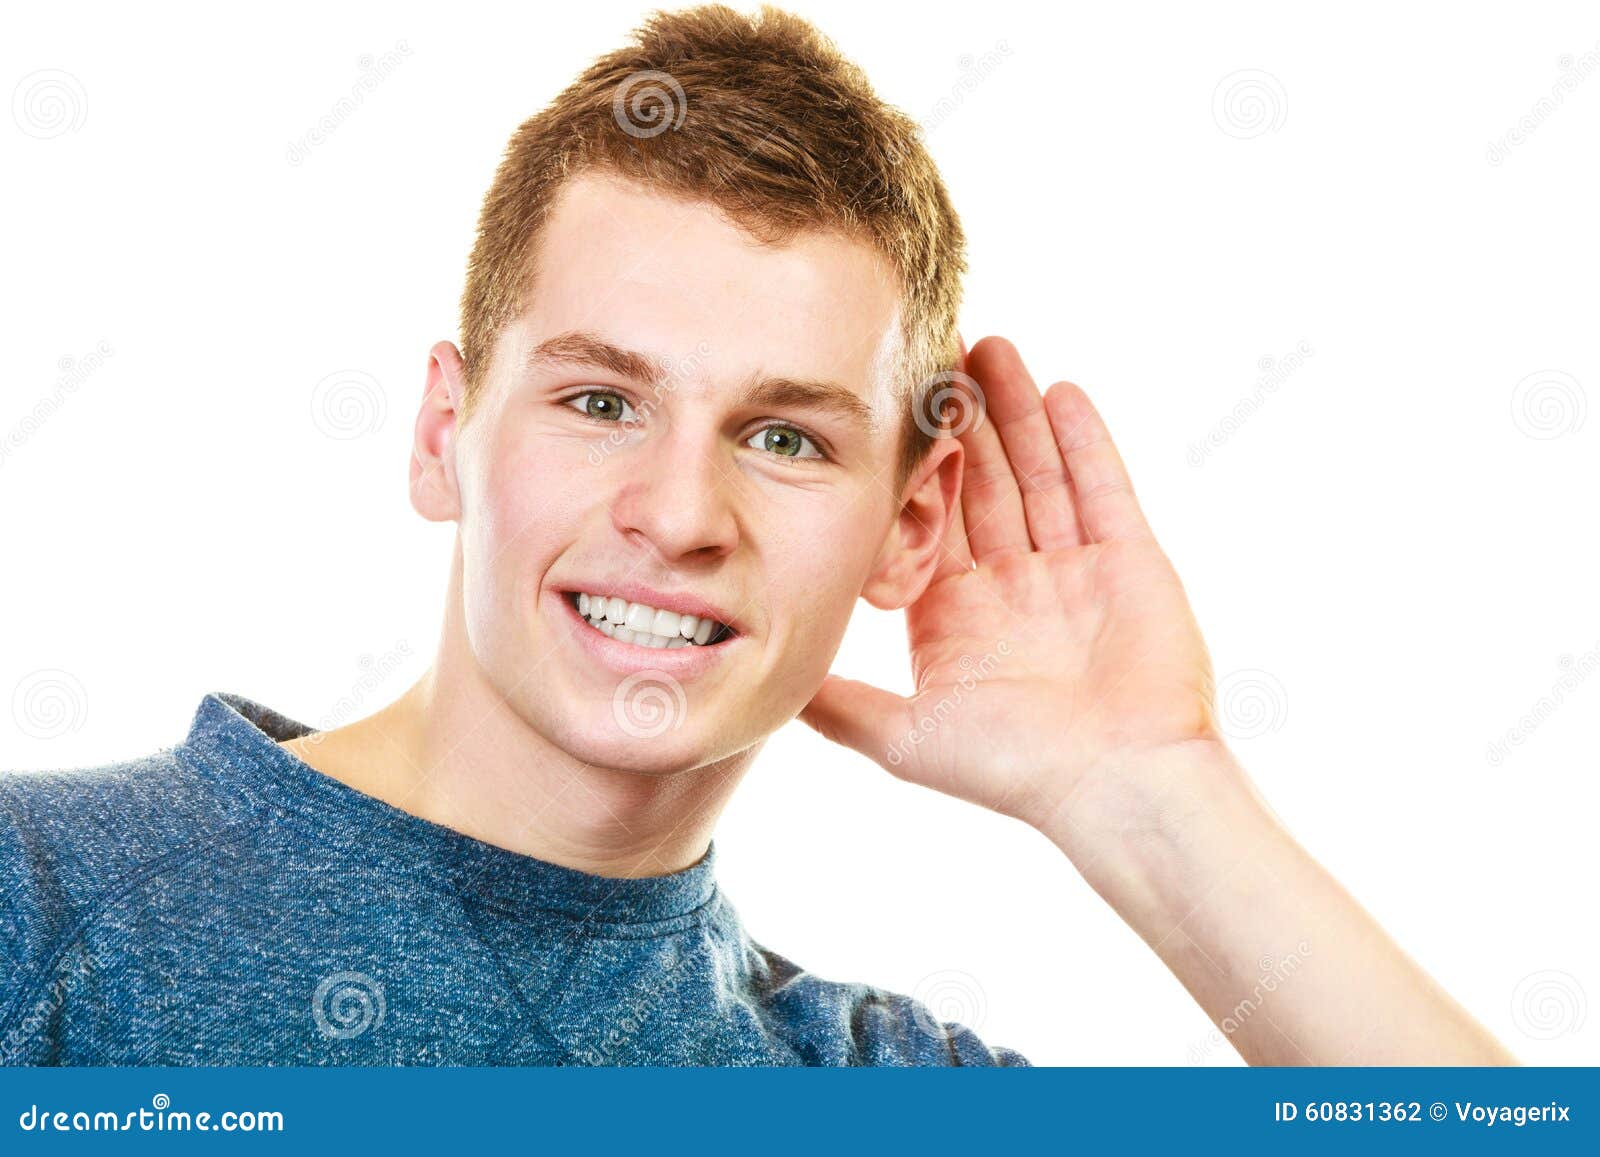 <b>Gossip boy</b> with hand behind ear spying - gossip-boy-hand-behind-ear-spying-young-man-holding-to-listening-isolated-white-background-60831362